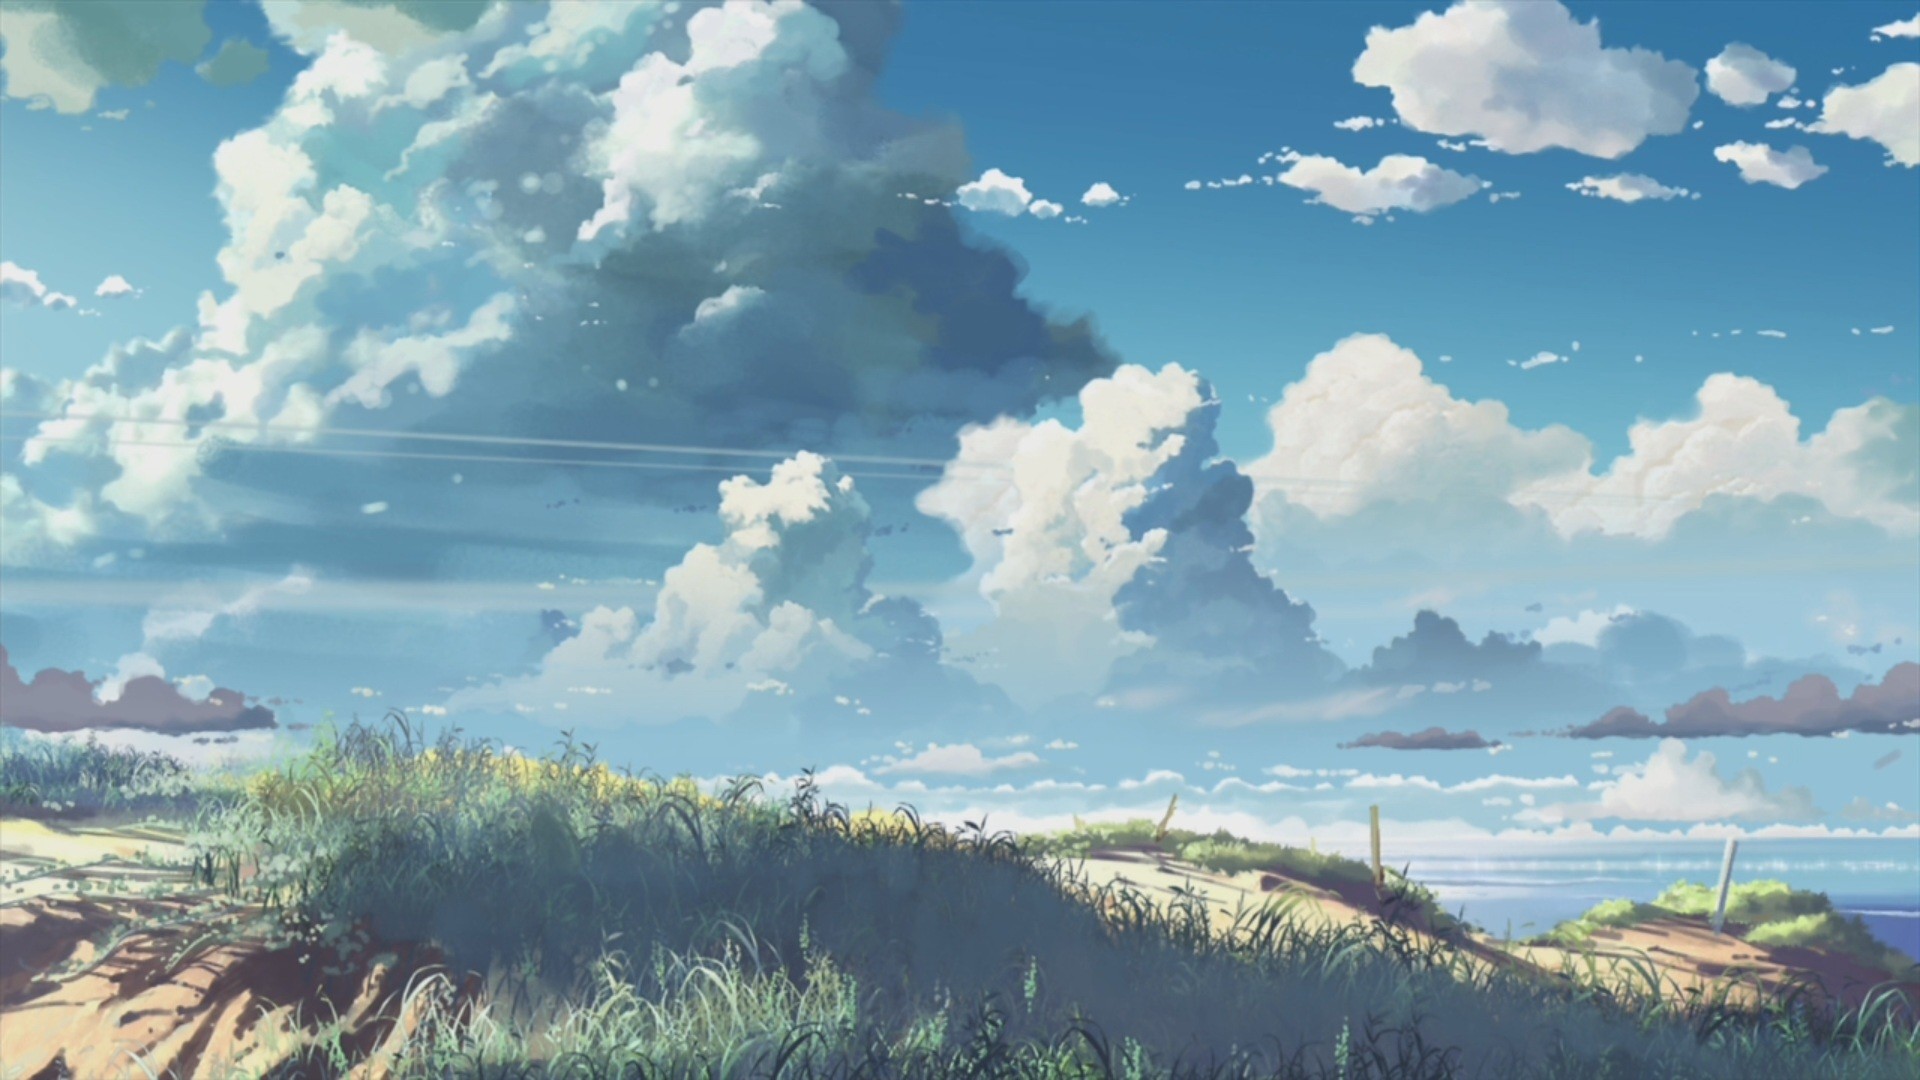 1920x1080 Image for Anime Scenery Background Wallpaper